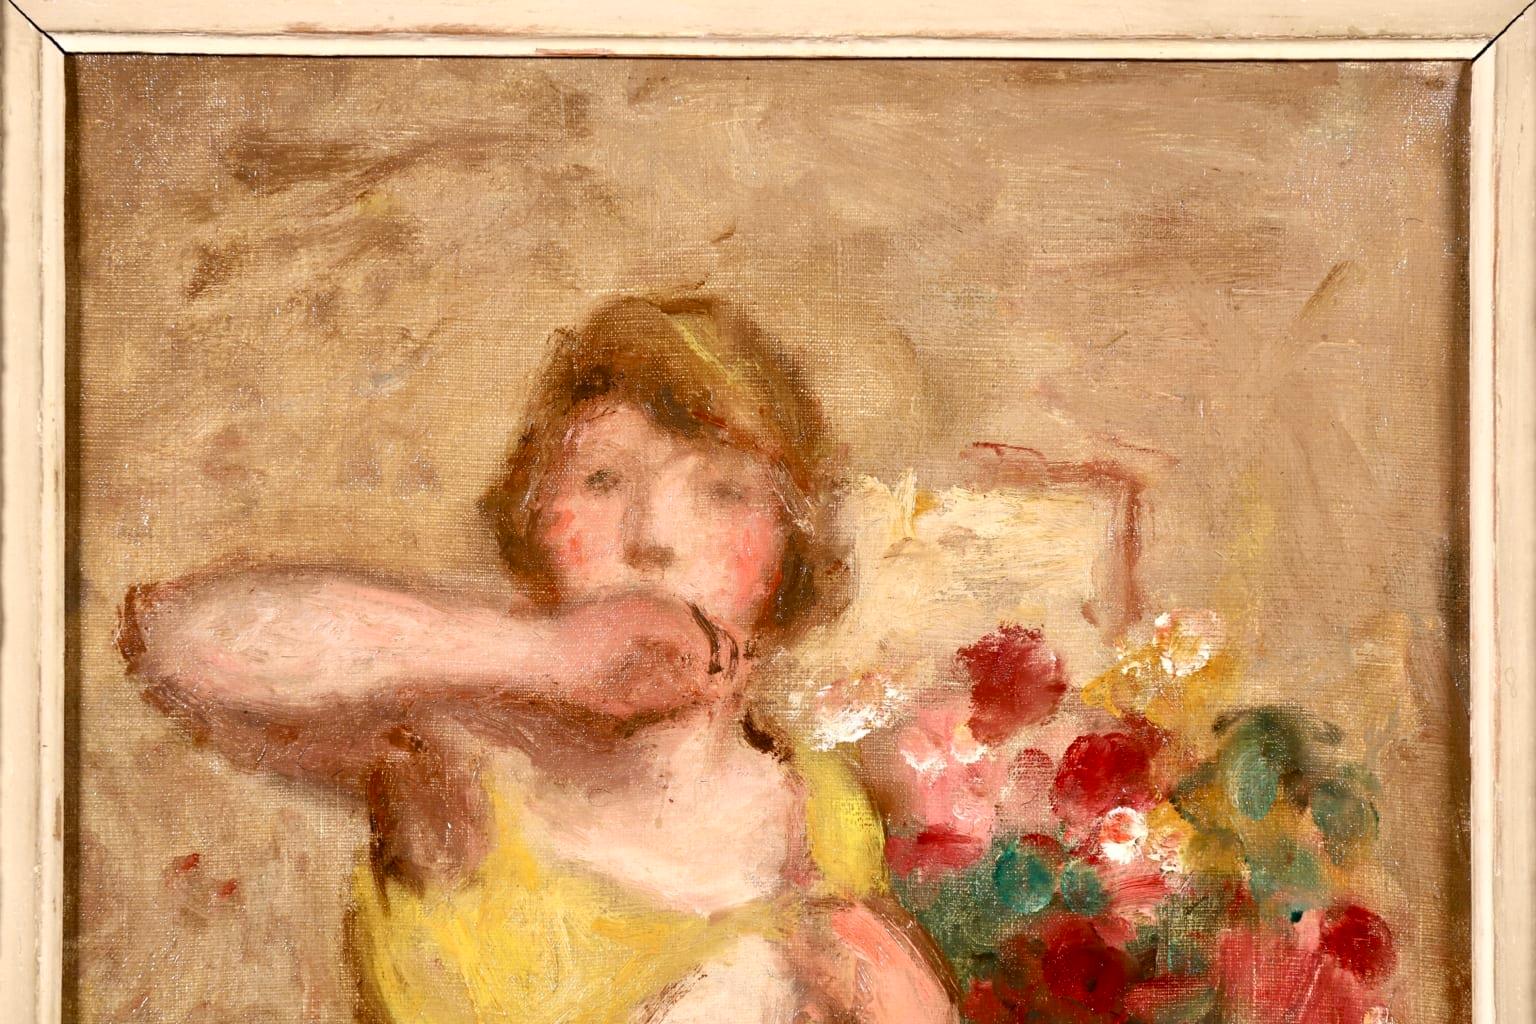 A beautiful oil on original canvas circa 1910 by French post impressionist painter Georges D'Espagnat. The work depicats a nude woman in a yellow shawl standing by a blue vase filled with pink, red and white flowers.

Signature:
Signed lower